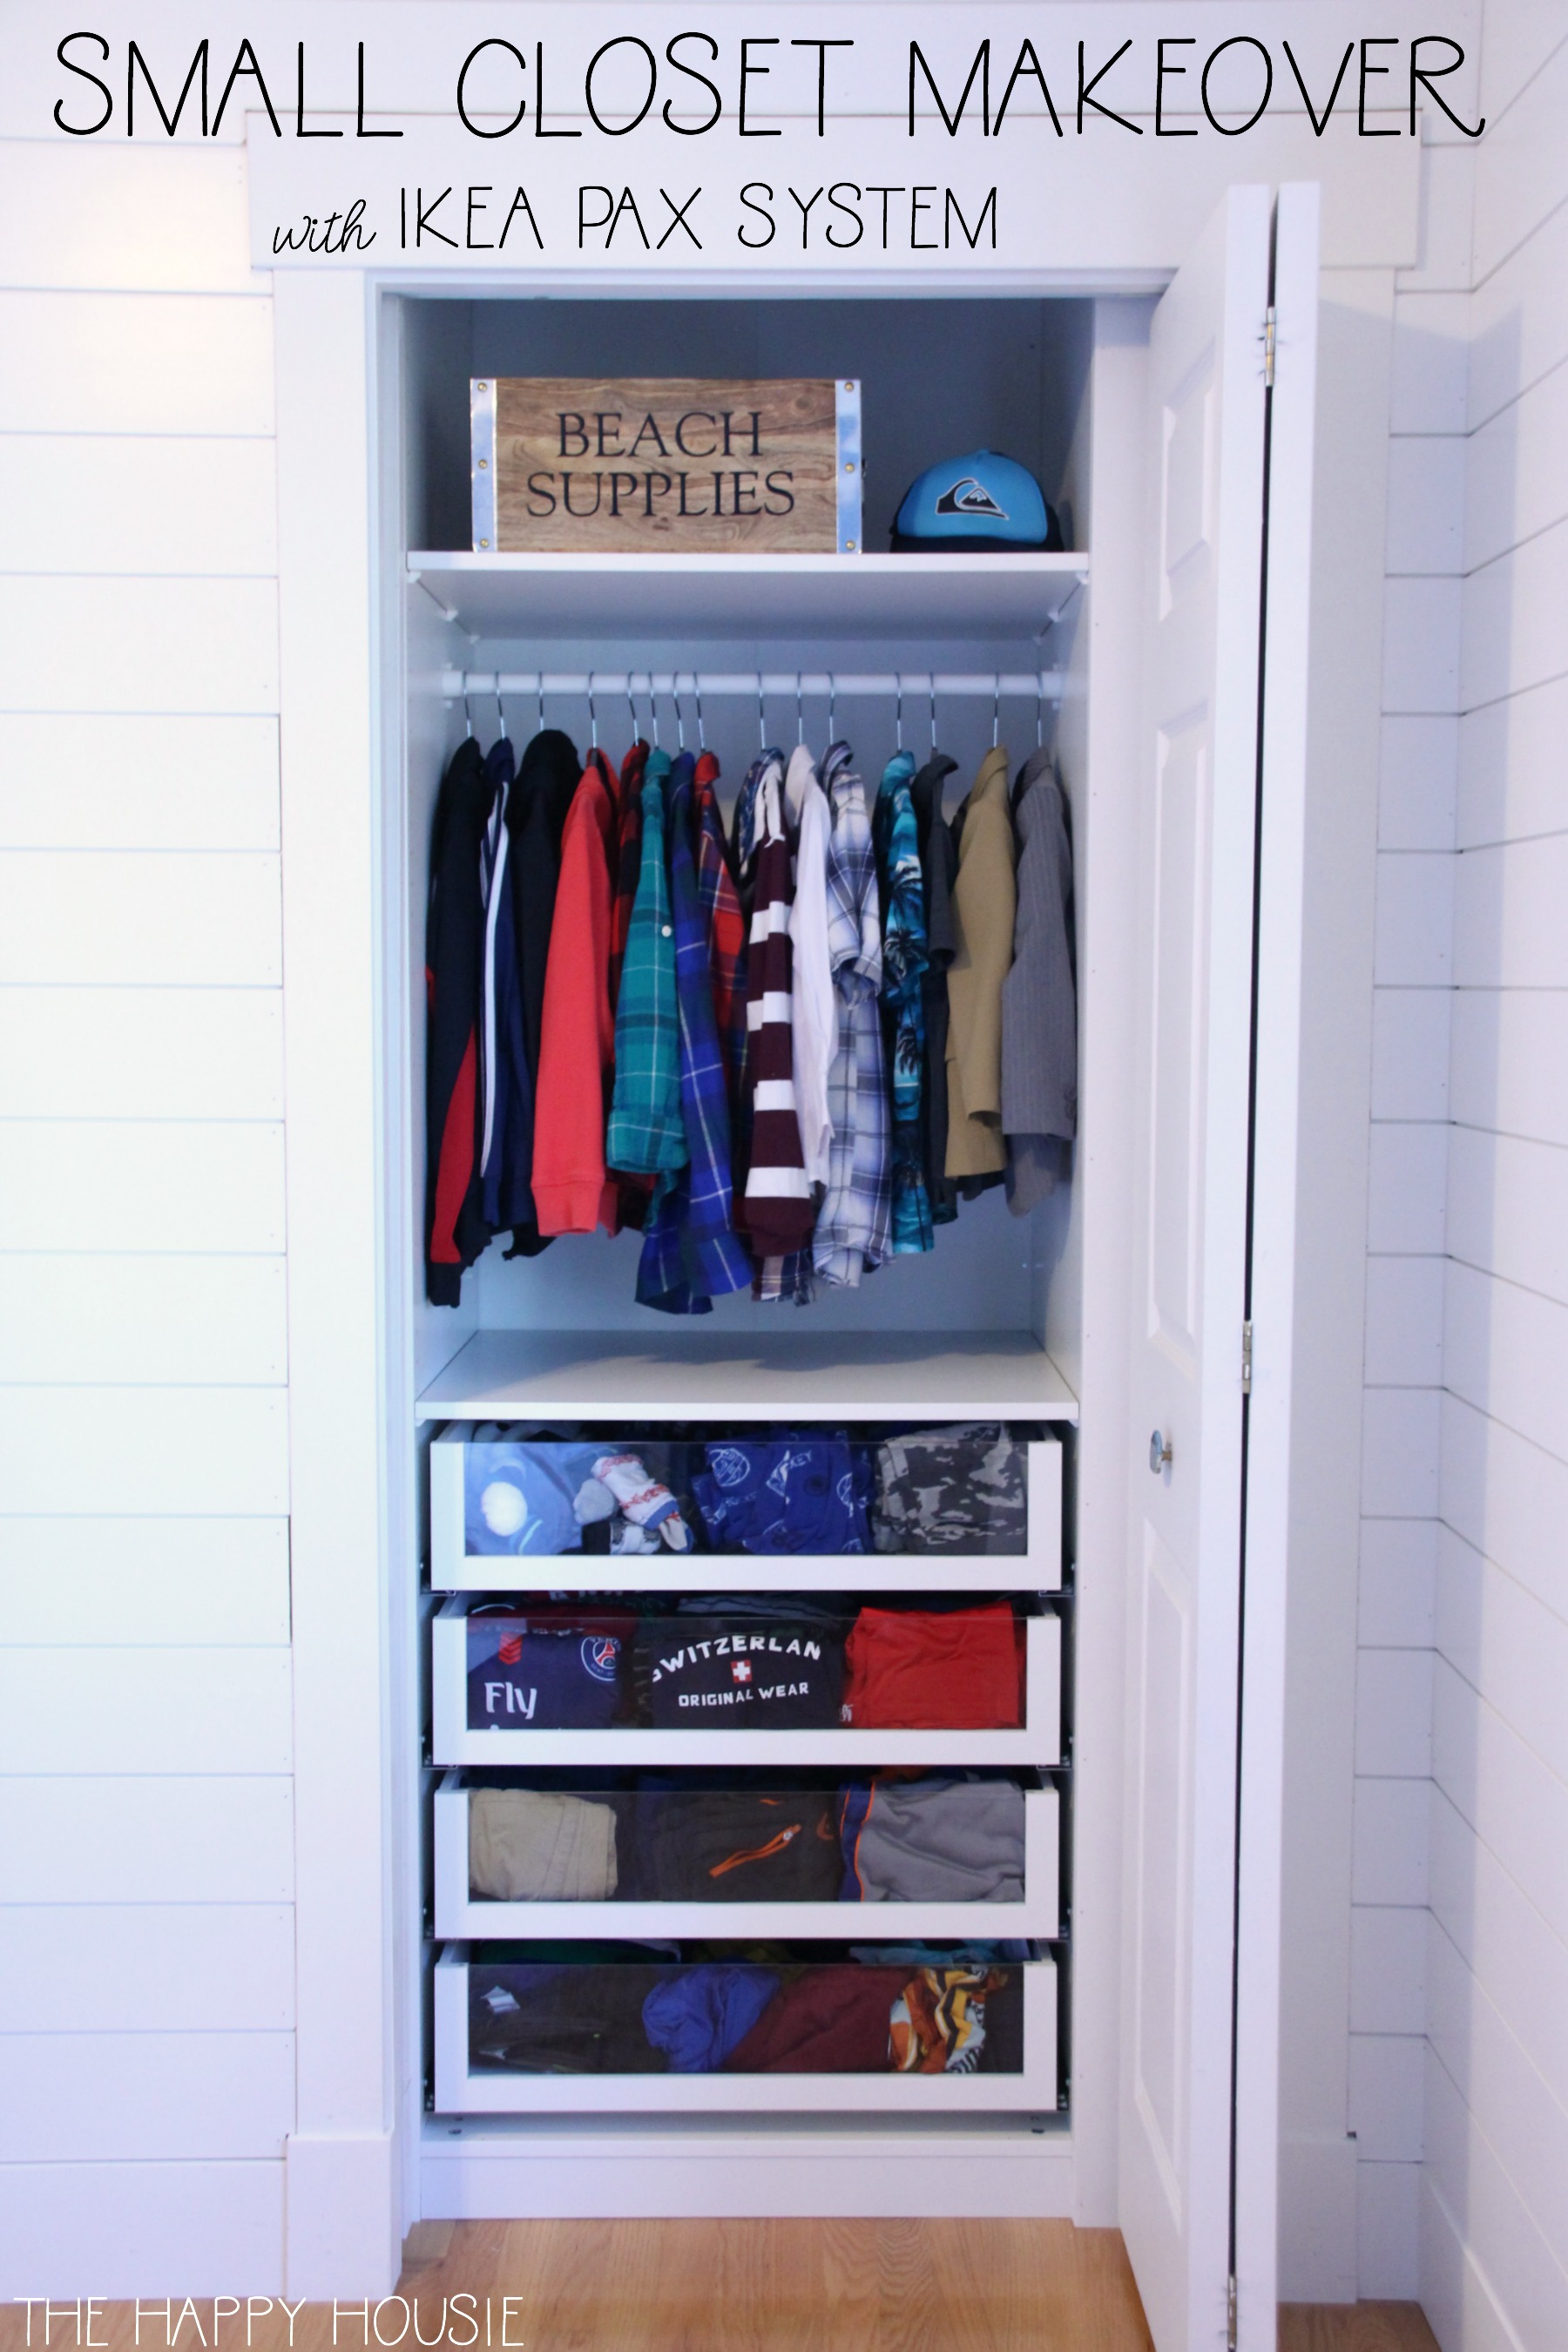 https://www.thehappyhousie.com/wp-content/uploads/2018/04/awesome-small-closet-organizational-makeover-with-the-Ikea-Pax-wardrobe-system-.jpg